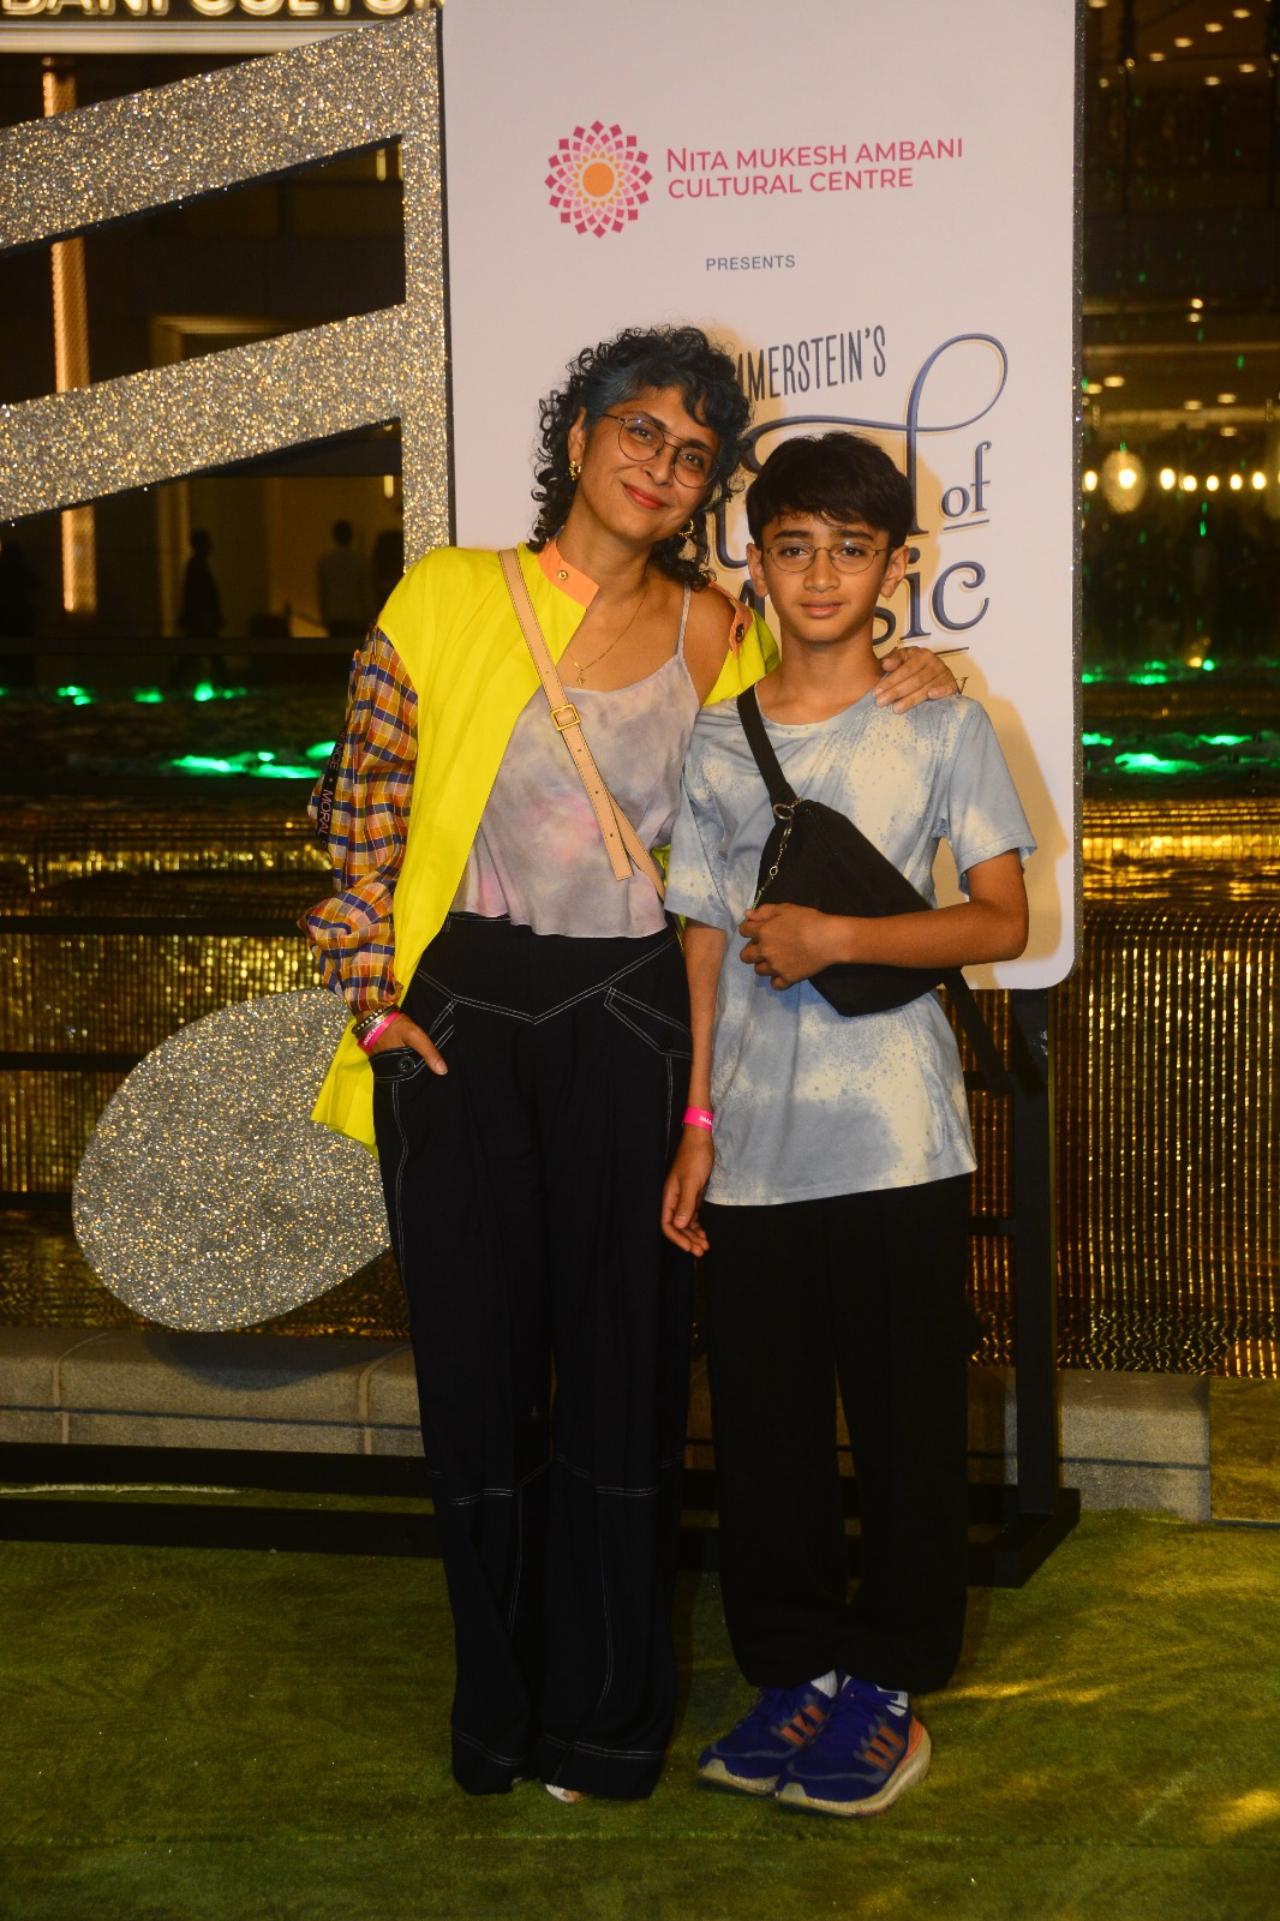 Aamir Khan's ex-wife Kiran Rao was at the event with their son Azad